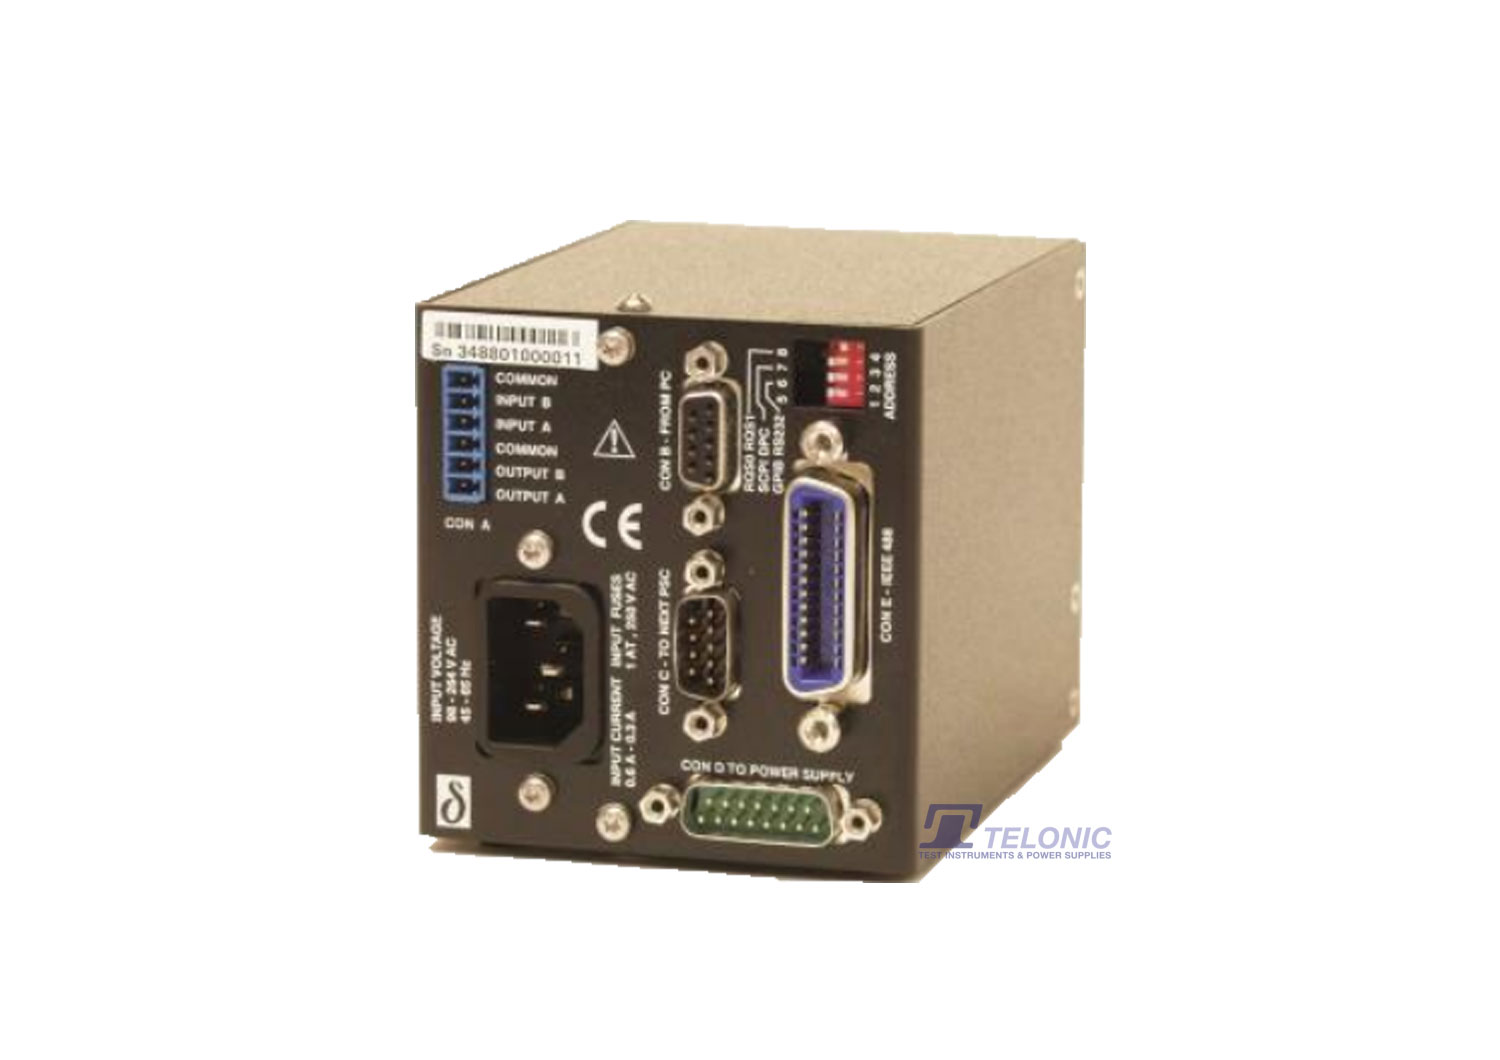 Connect To Analogue, PSC-488, IEEE488 External Interface Option For SM3300